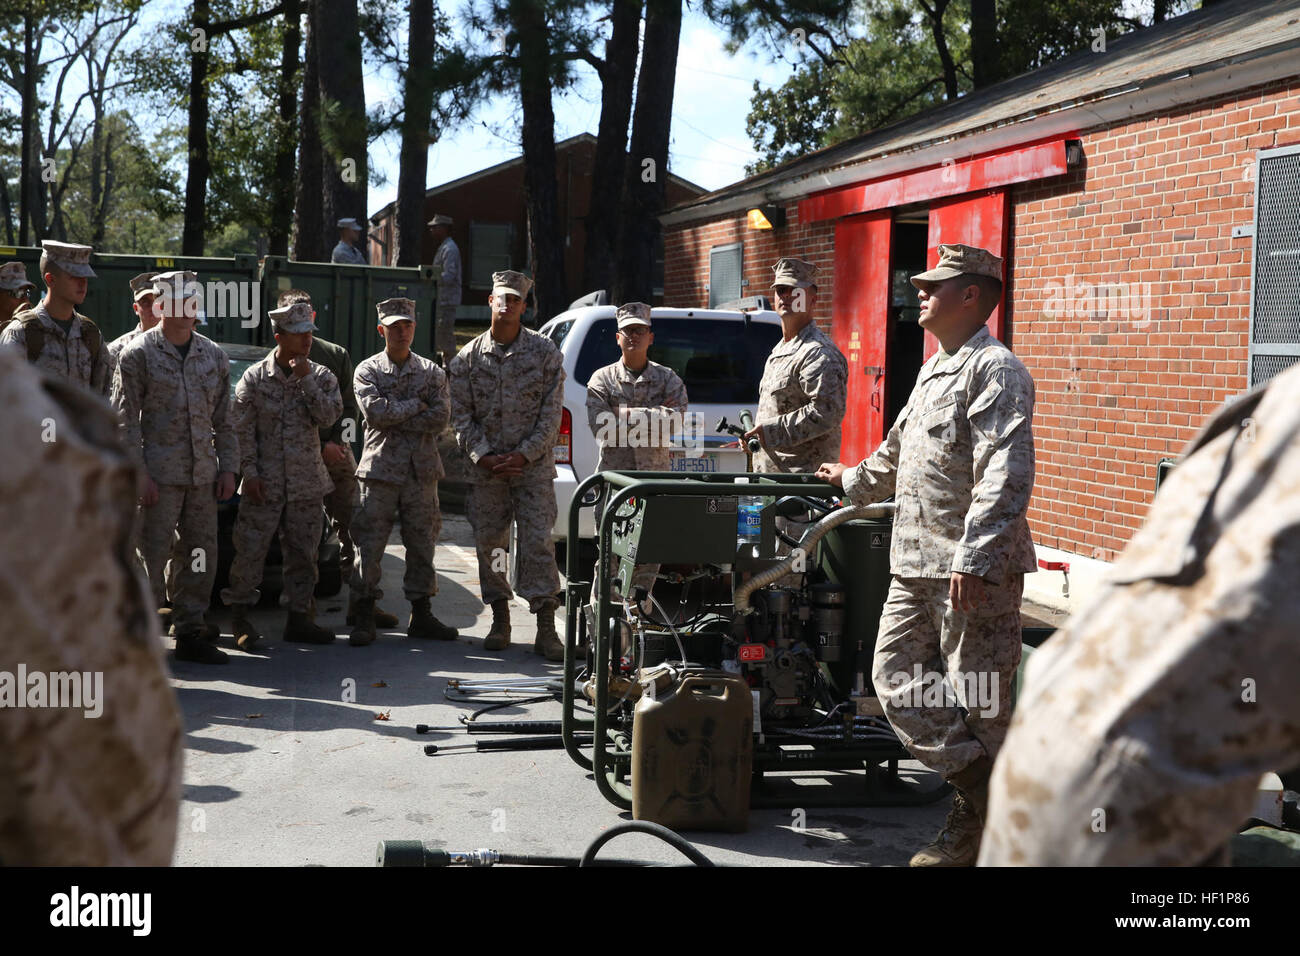 Lance Cpl. Genaro E. Aranda (right), a chemical, biological, radiological and nuclear defense specialist with CBRN Platoon, Combat Logistics Regiment 27, 2nd Marine Logistics Group, speaks to Marines and sailors with 2nd MLG about the M26 Joint Service Transportable Decontamination System during a CBRN decontamination course aboard Camp Lejeune, N.C., Oct. 23, 2013. Students of the week-long course learned about detection of and protection against CBRN agents and the processes of decontaminating troops, equipment and vehicles. License to clean, Marines, sailors qualify for CBRN decontamination Stock Photo